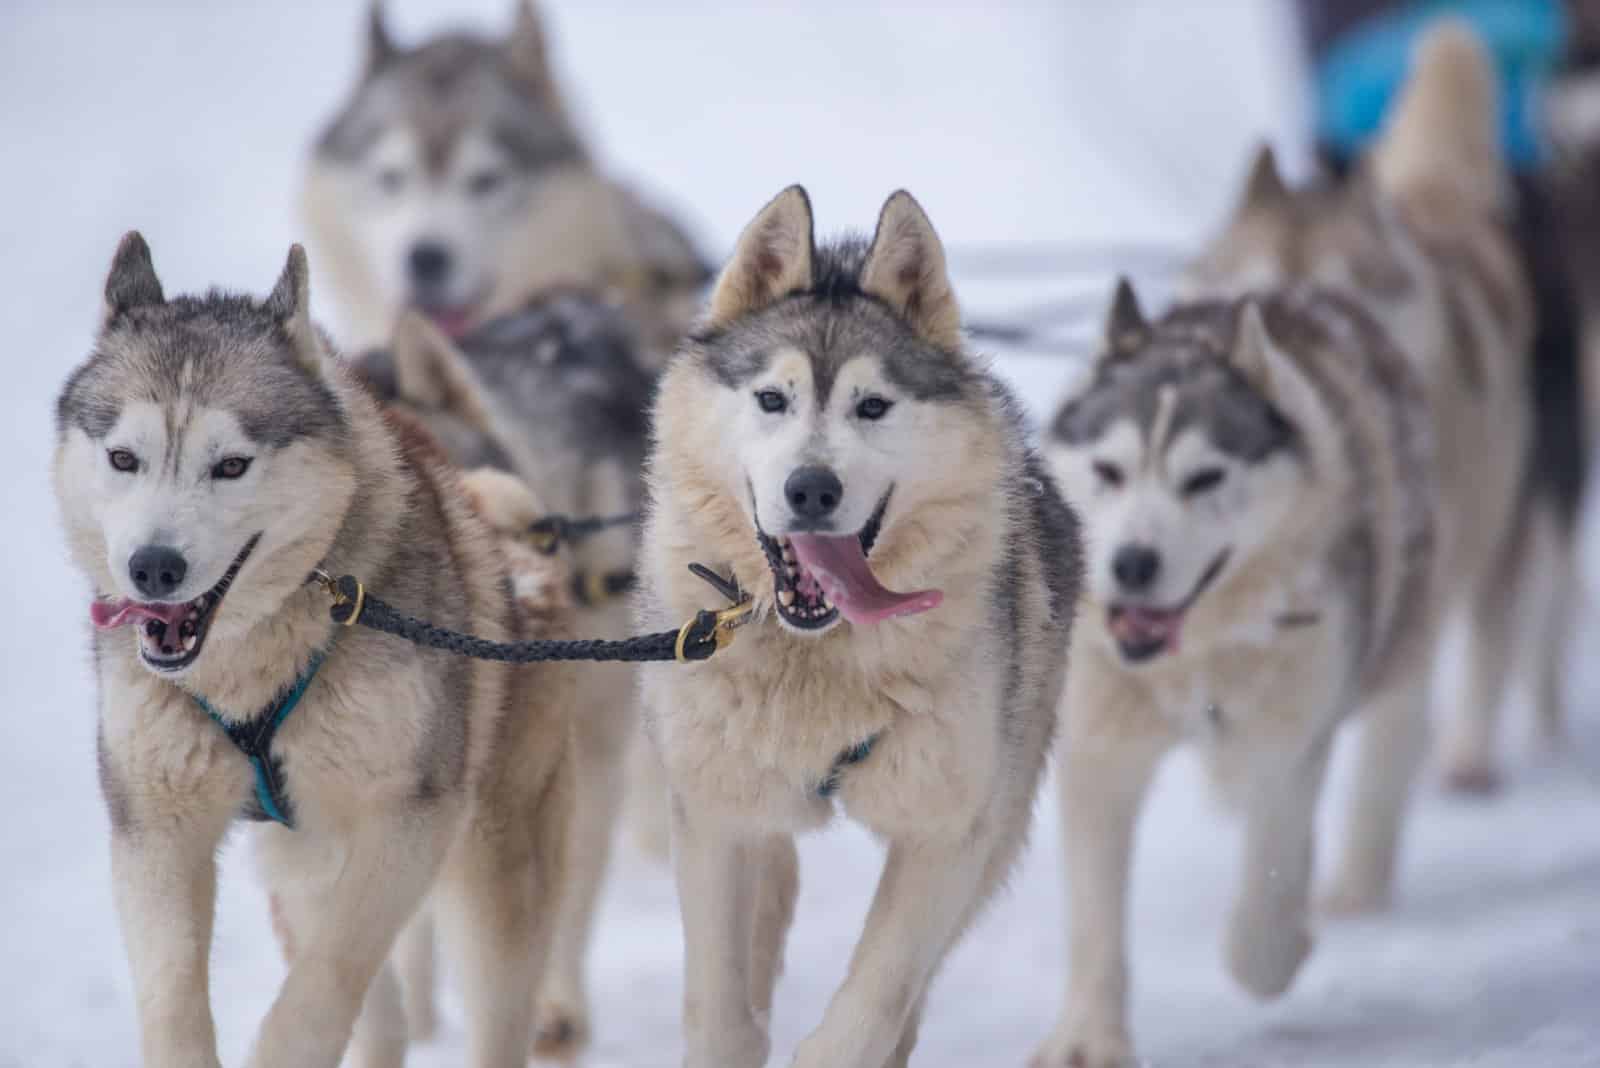 <p><span>Associated with Alaska, “mushing” refers to driving a dogsled, a traditional mode of transportation in the snowy terrain.</span></p>